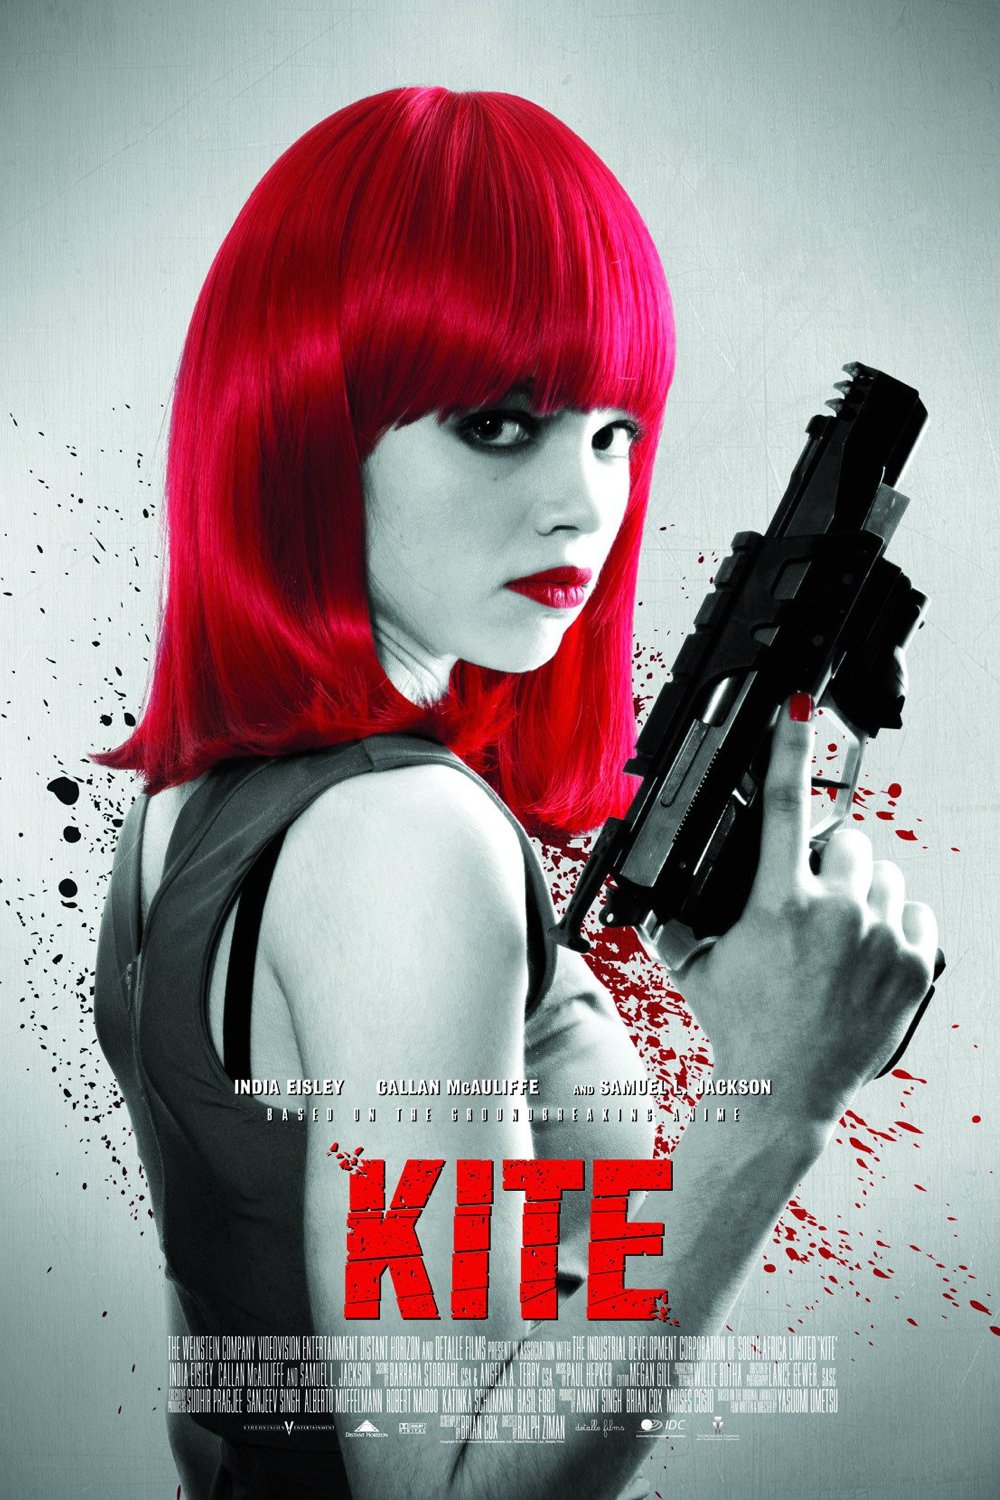 Poster for the movie "Kite"